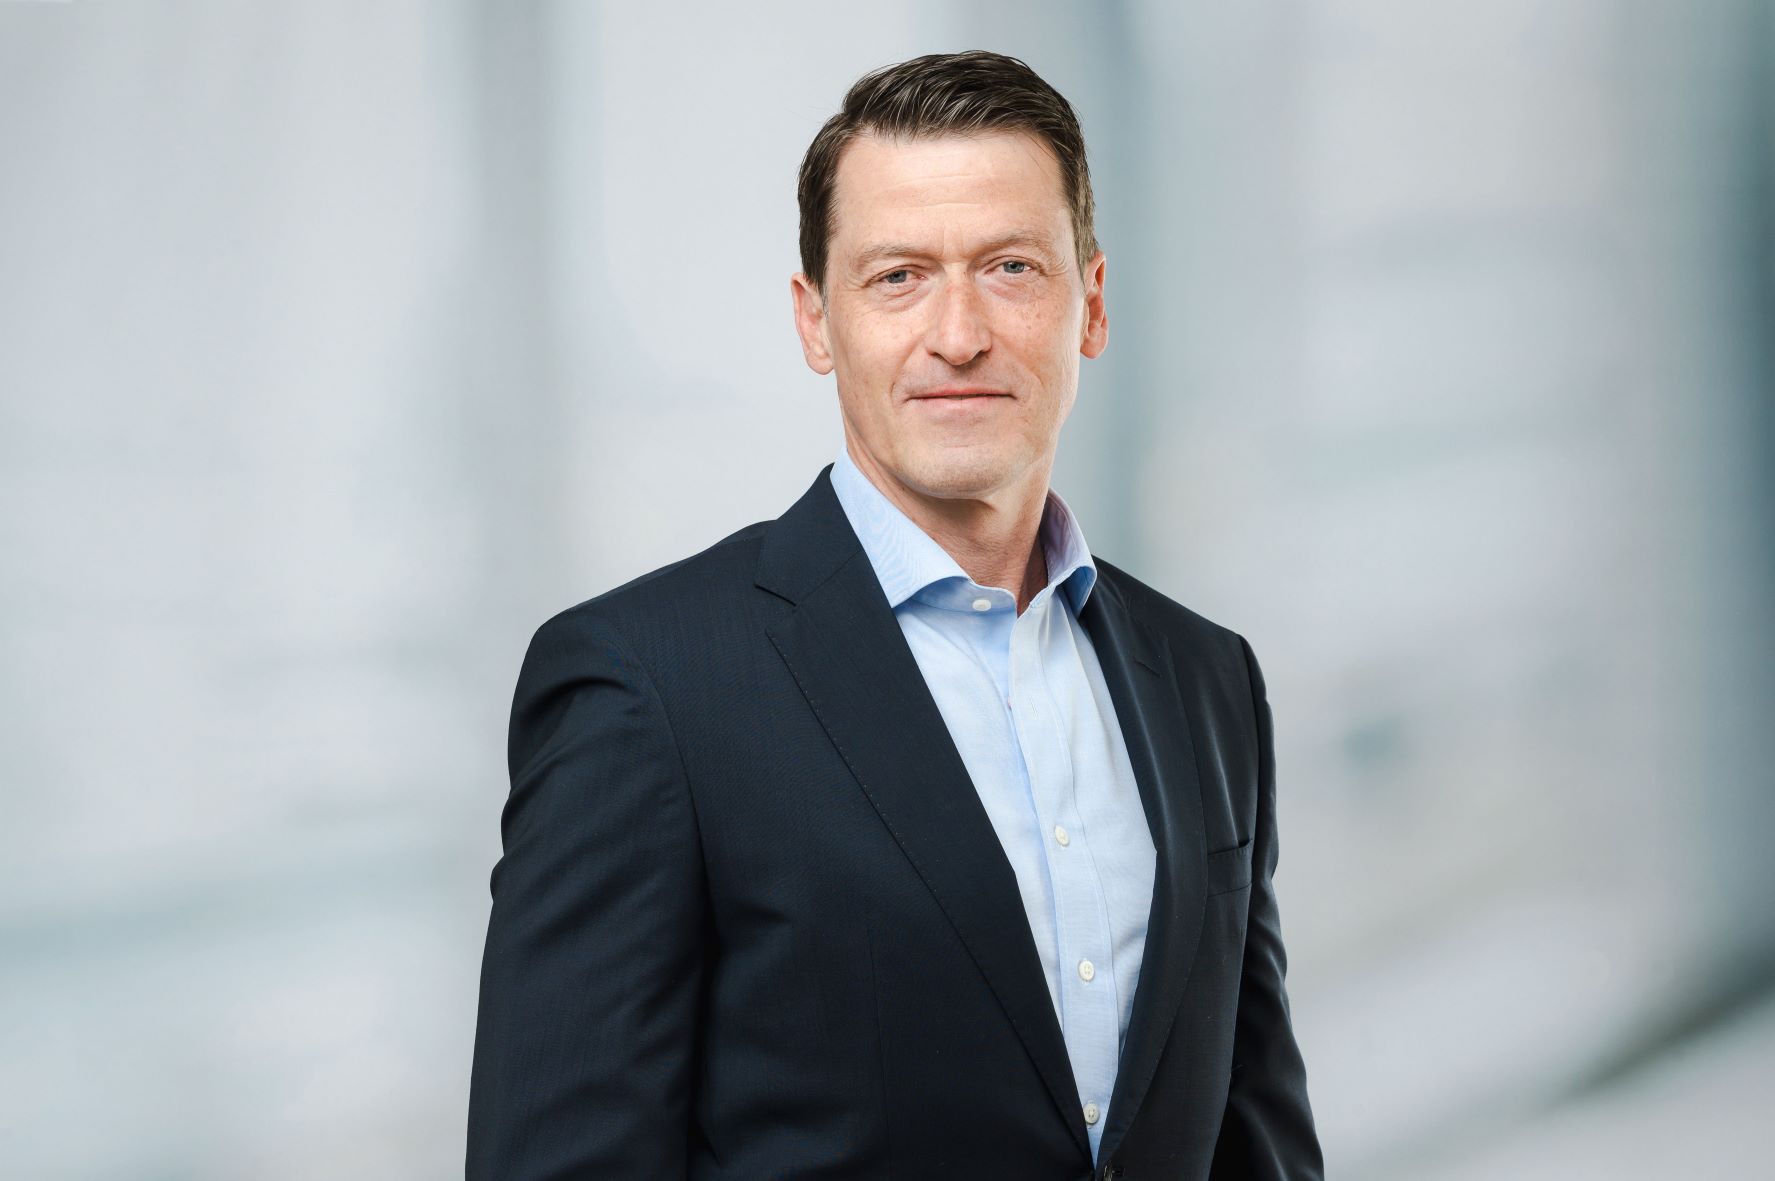 Industry expert Thomas Kastenhuber joins Blue Pearl Energy to lead growth of energy services business in Germany